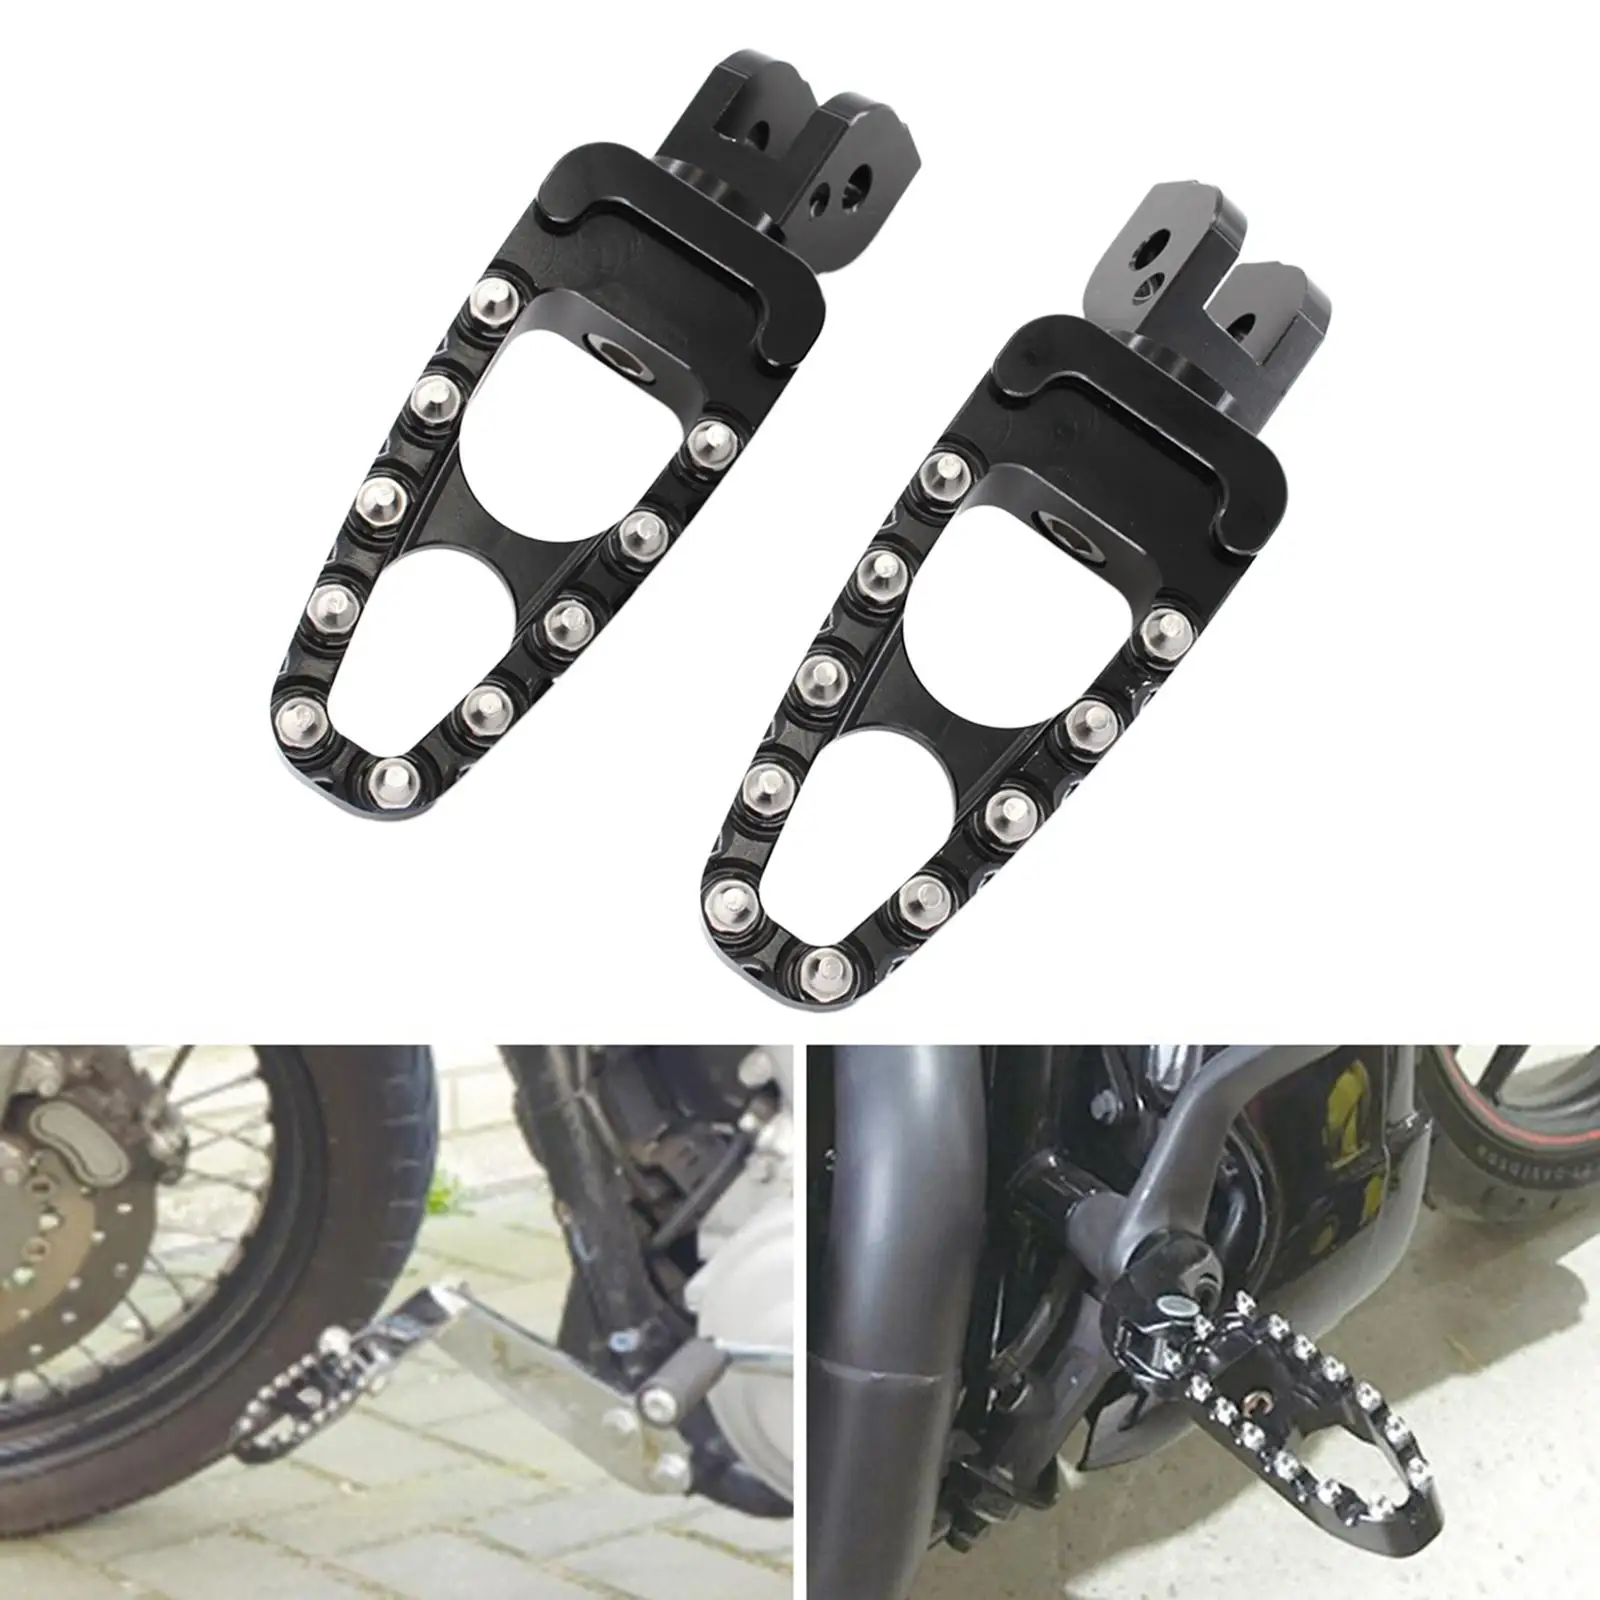 Foot Pegs Footpegs Footrests Foot Pedals Rests CNC for for Ducati Scramb... - $57.46